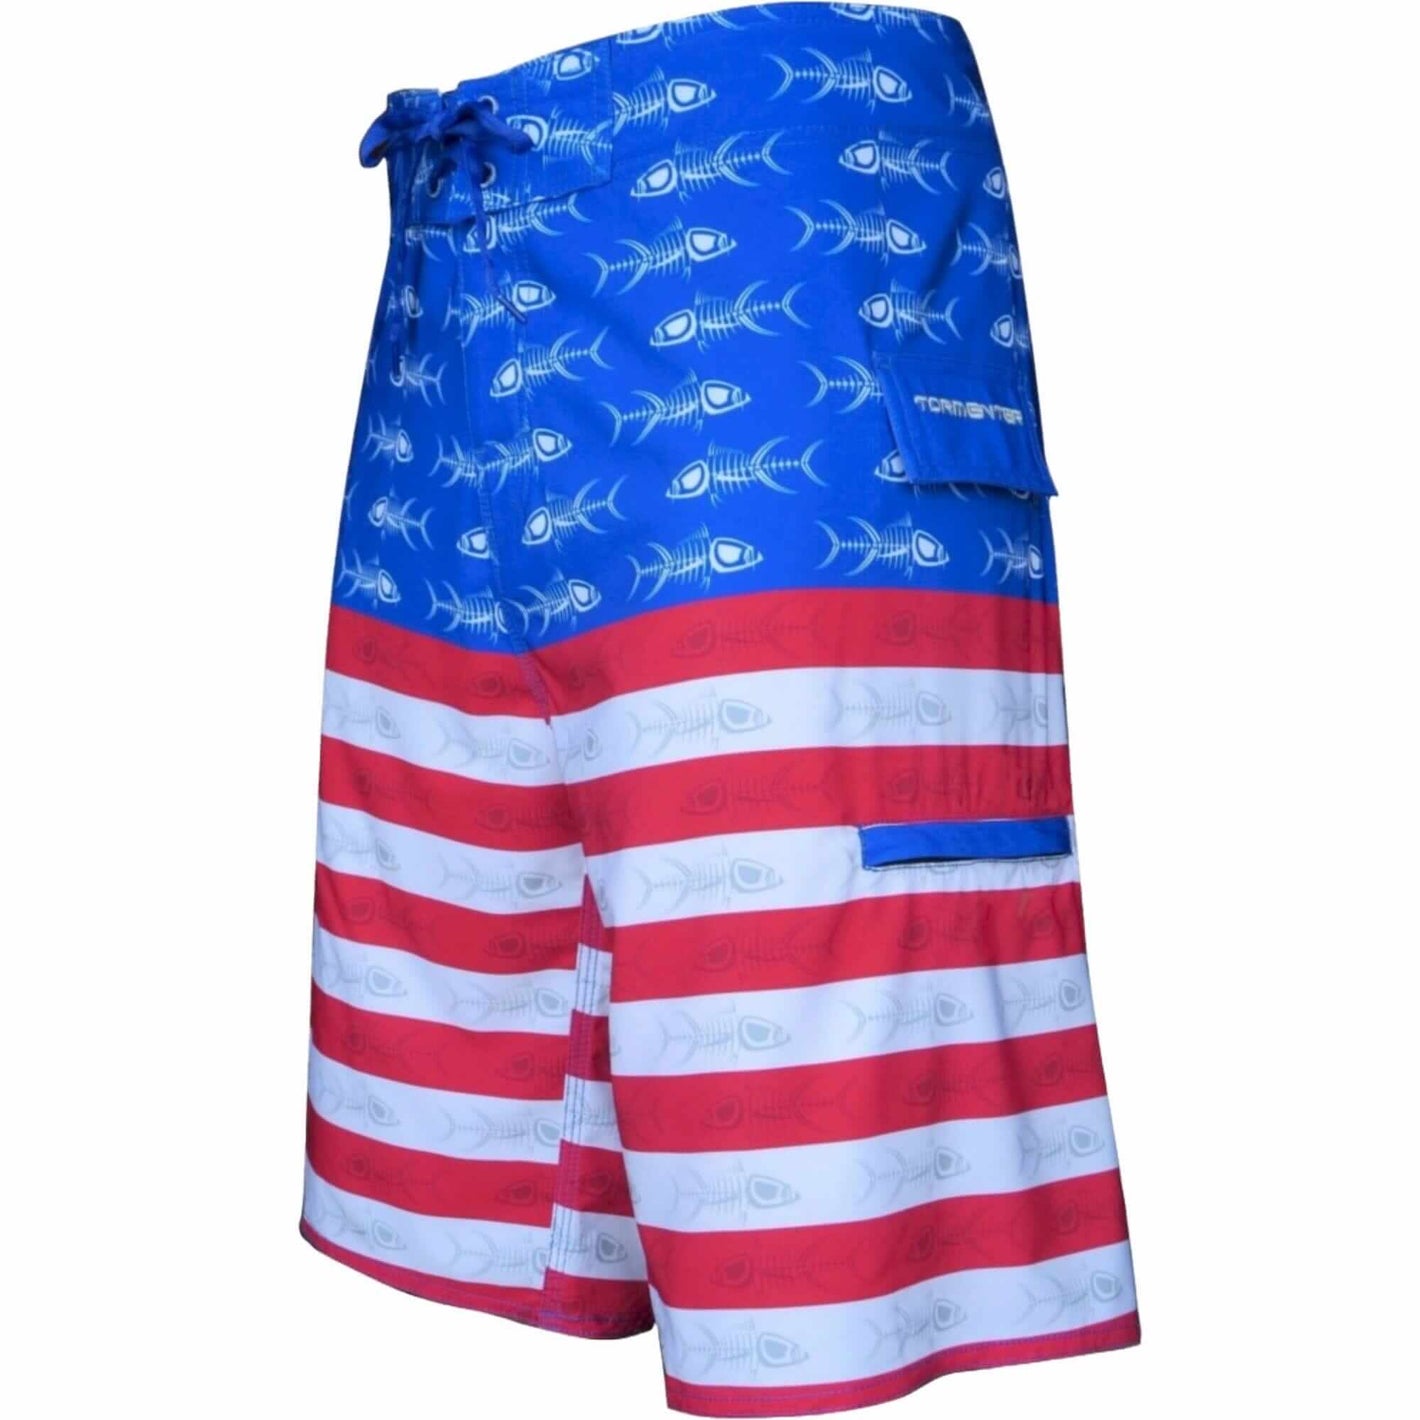 4x4 - 8 Way Stretch Board Shorts -STAY TRUE TO THE RED, WHITE & BLUE w/a pair of True Colors 4X4 Performance Board Shorts Tormenter Ocean 28 